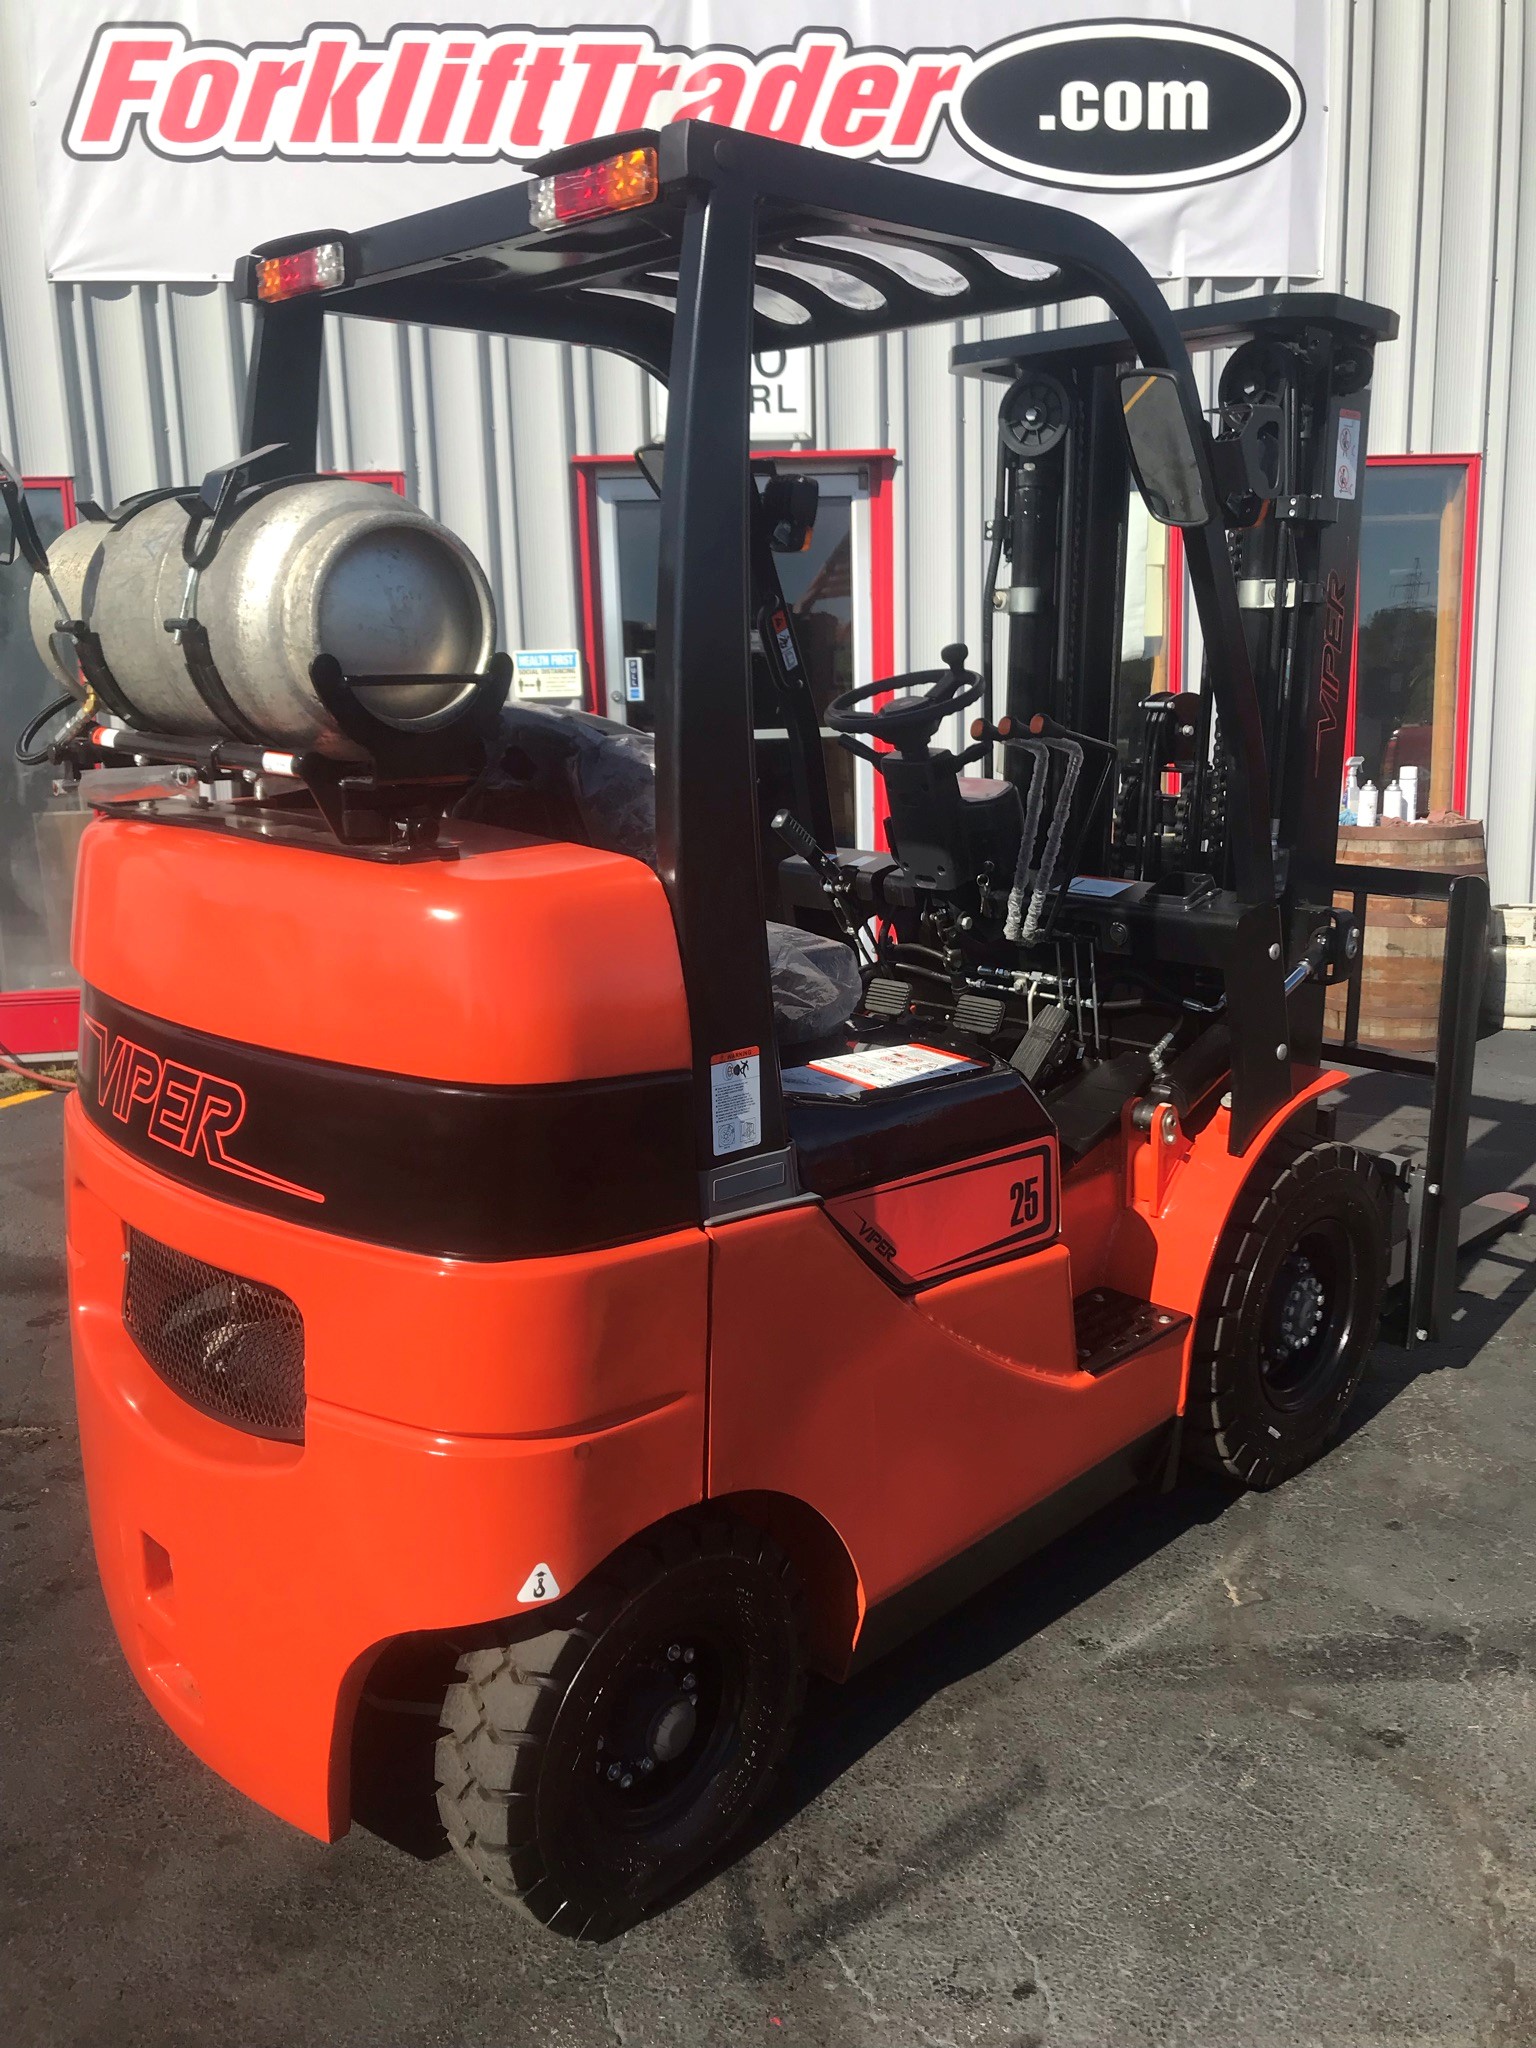 Orange viper forklift with 5,500lb capacity for sale